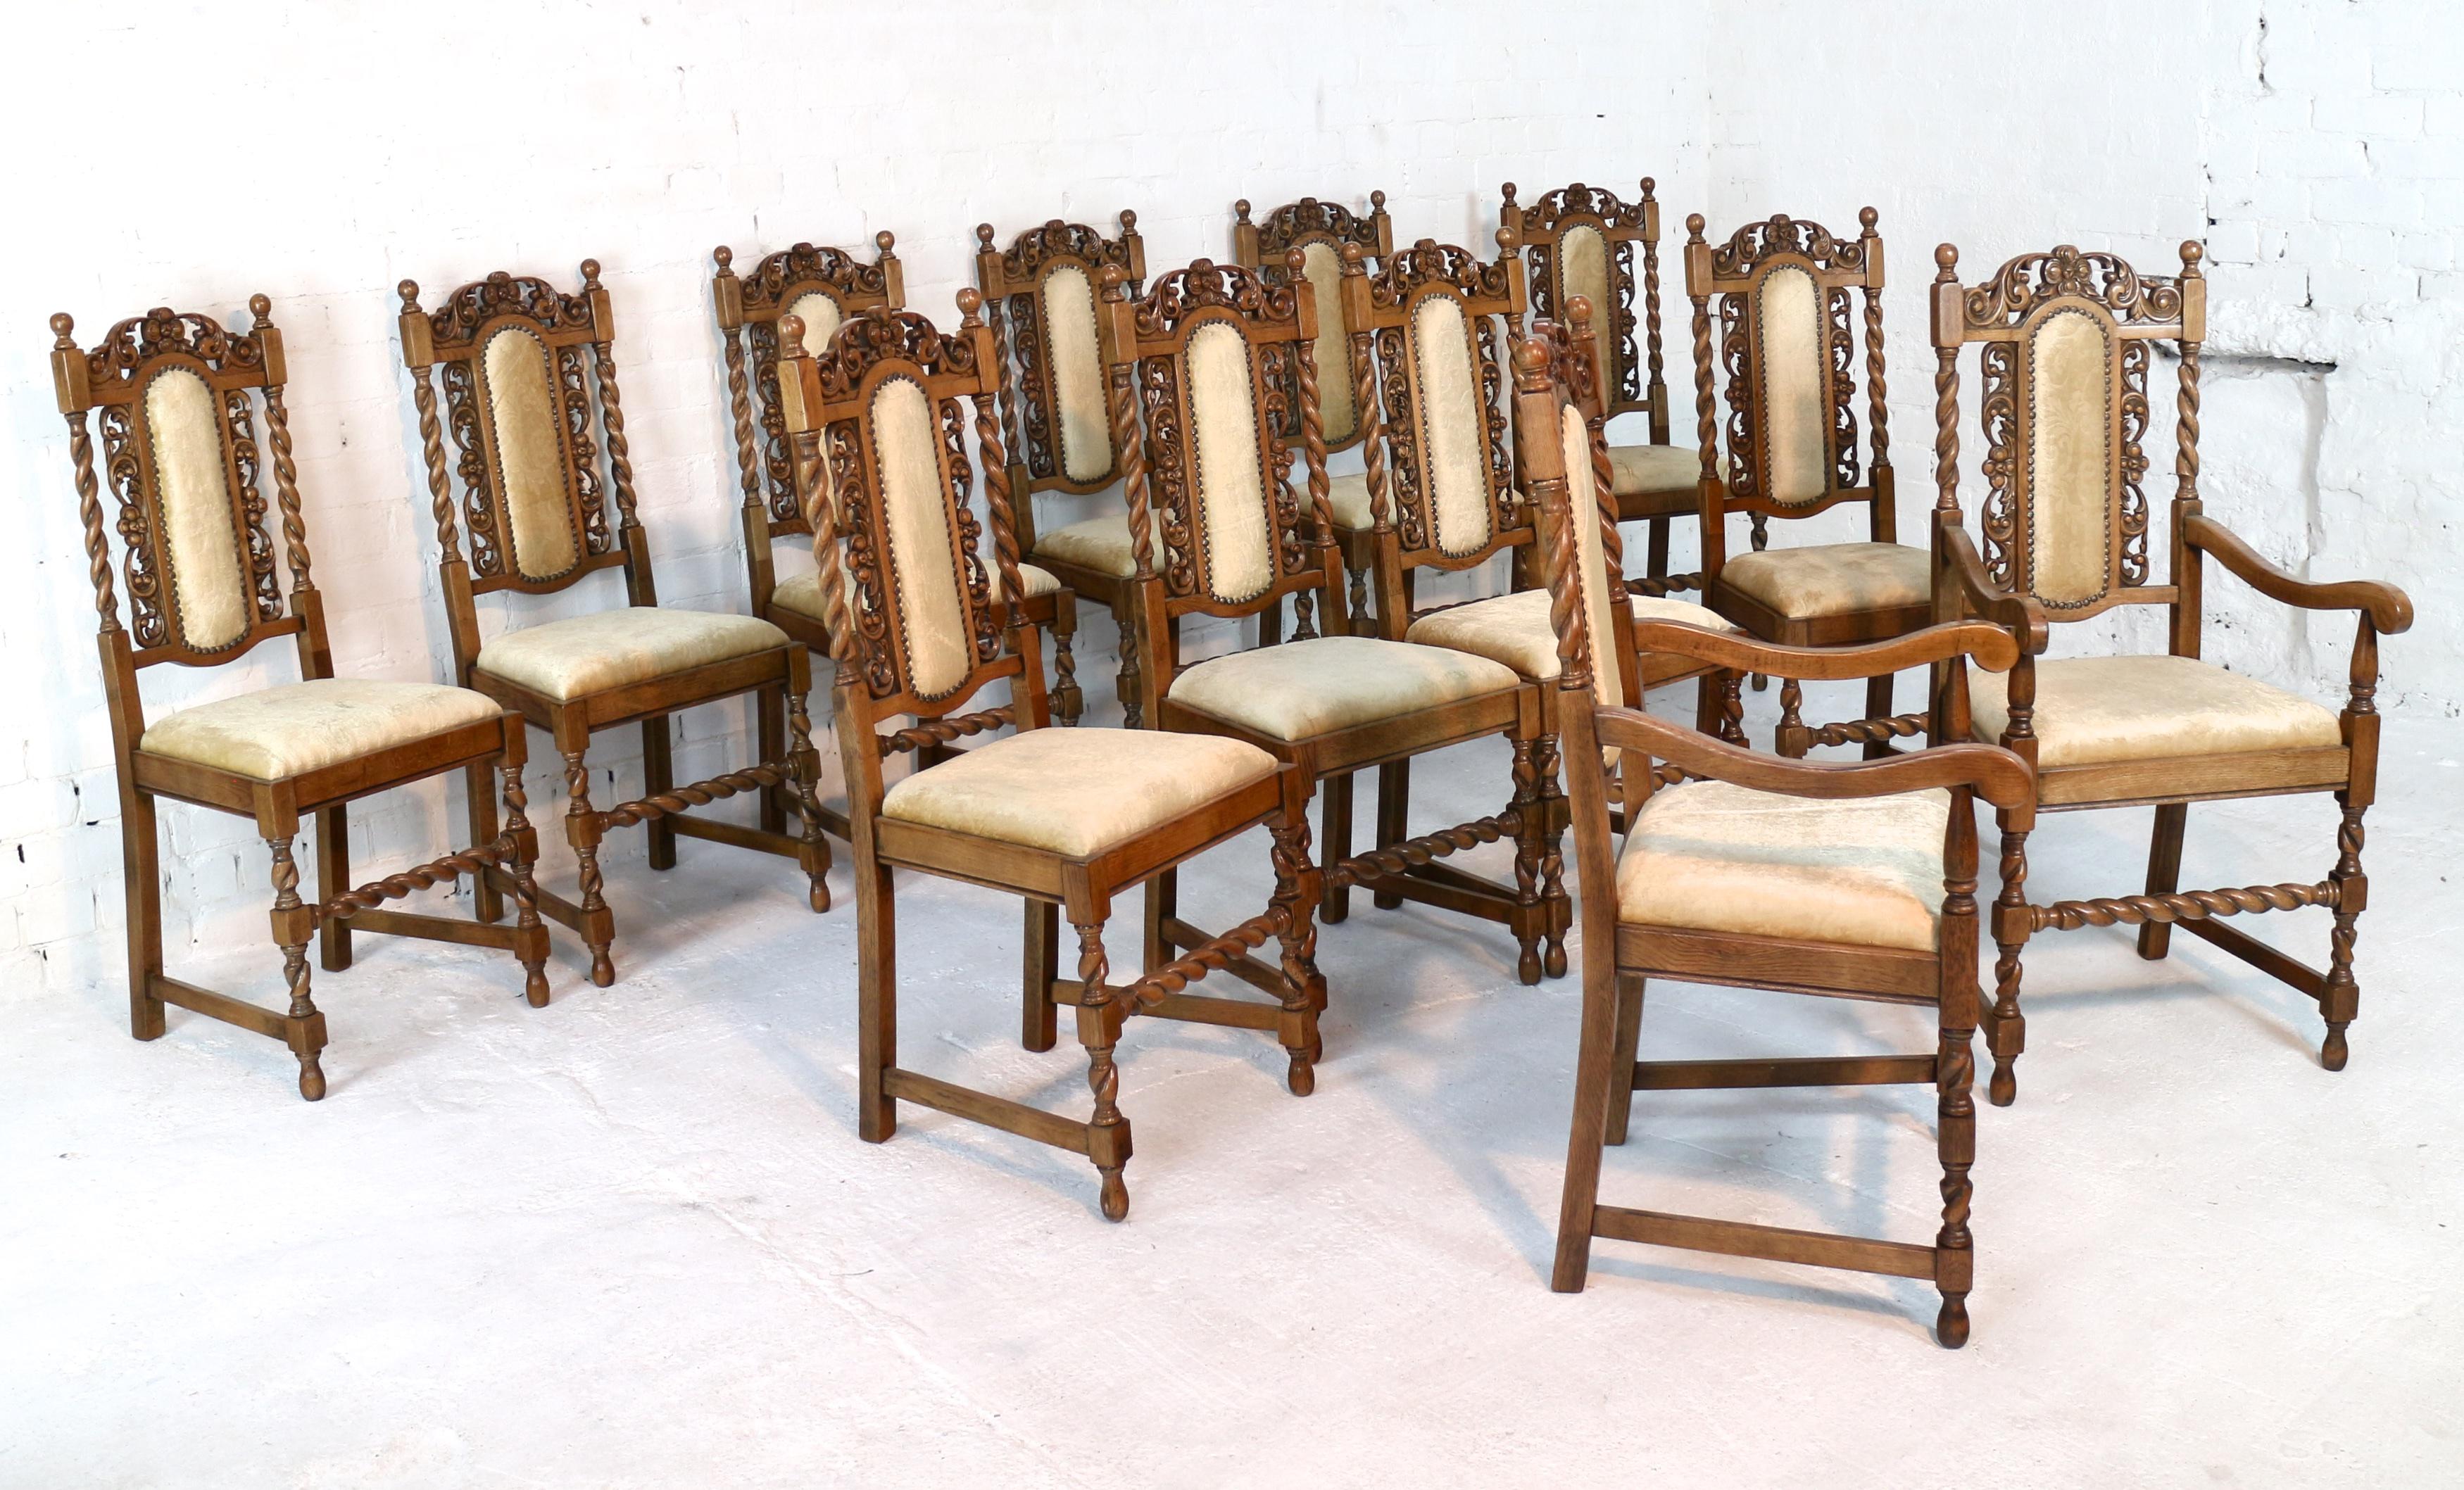 An attractive set of twelve Jacobean revival oak high back dining chairs comprising two carver armchairs and 10 side chairs. The padded backs surrounded by pierced carved fruit and foliage with ball finials and barley twist uprights, front legs and